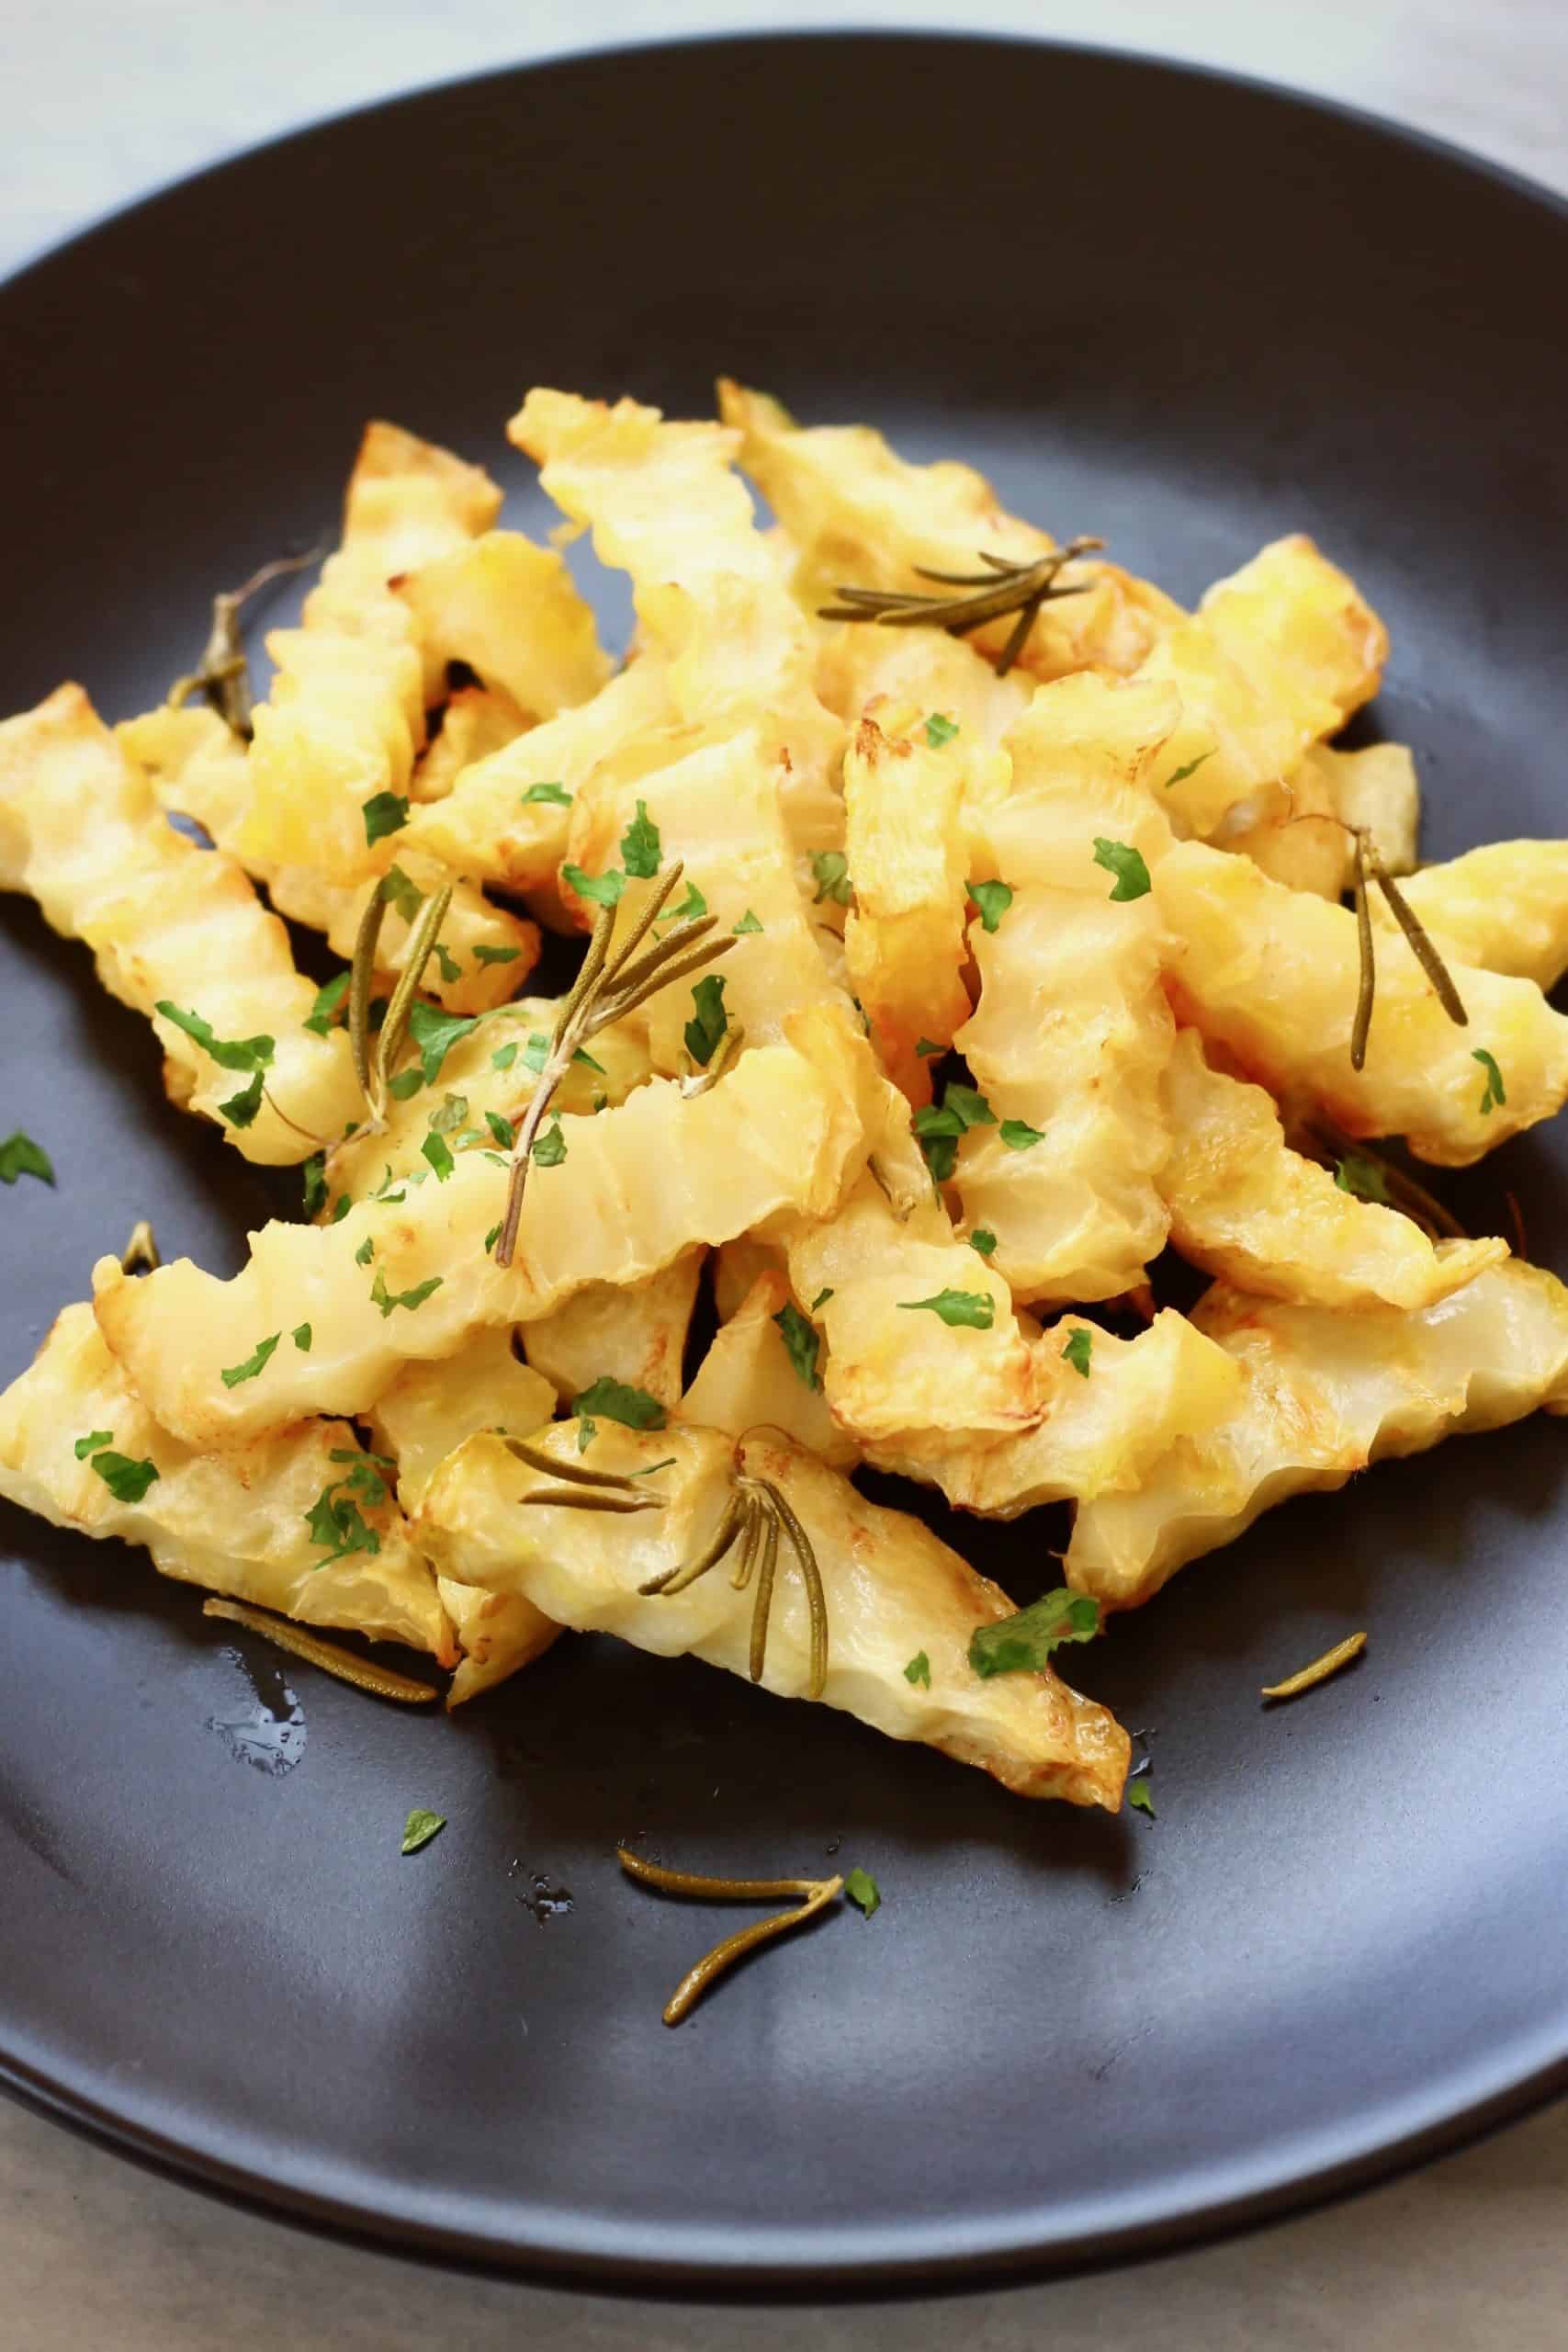 Crinkle-cut celeriac fries decorated with green herbs on a black plate